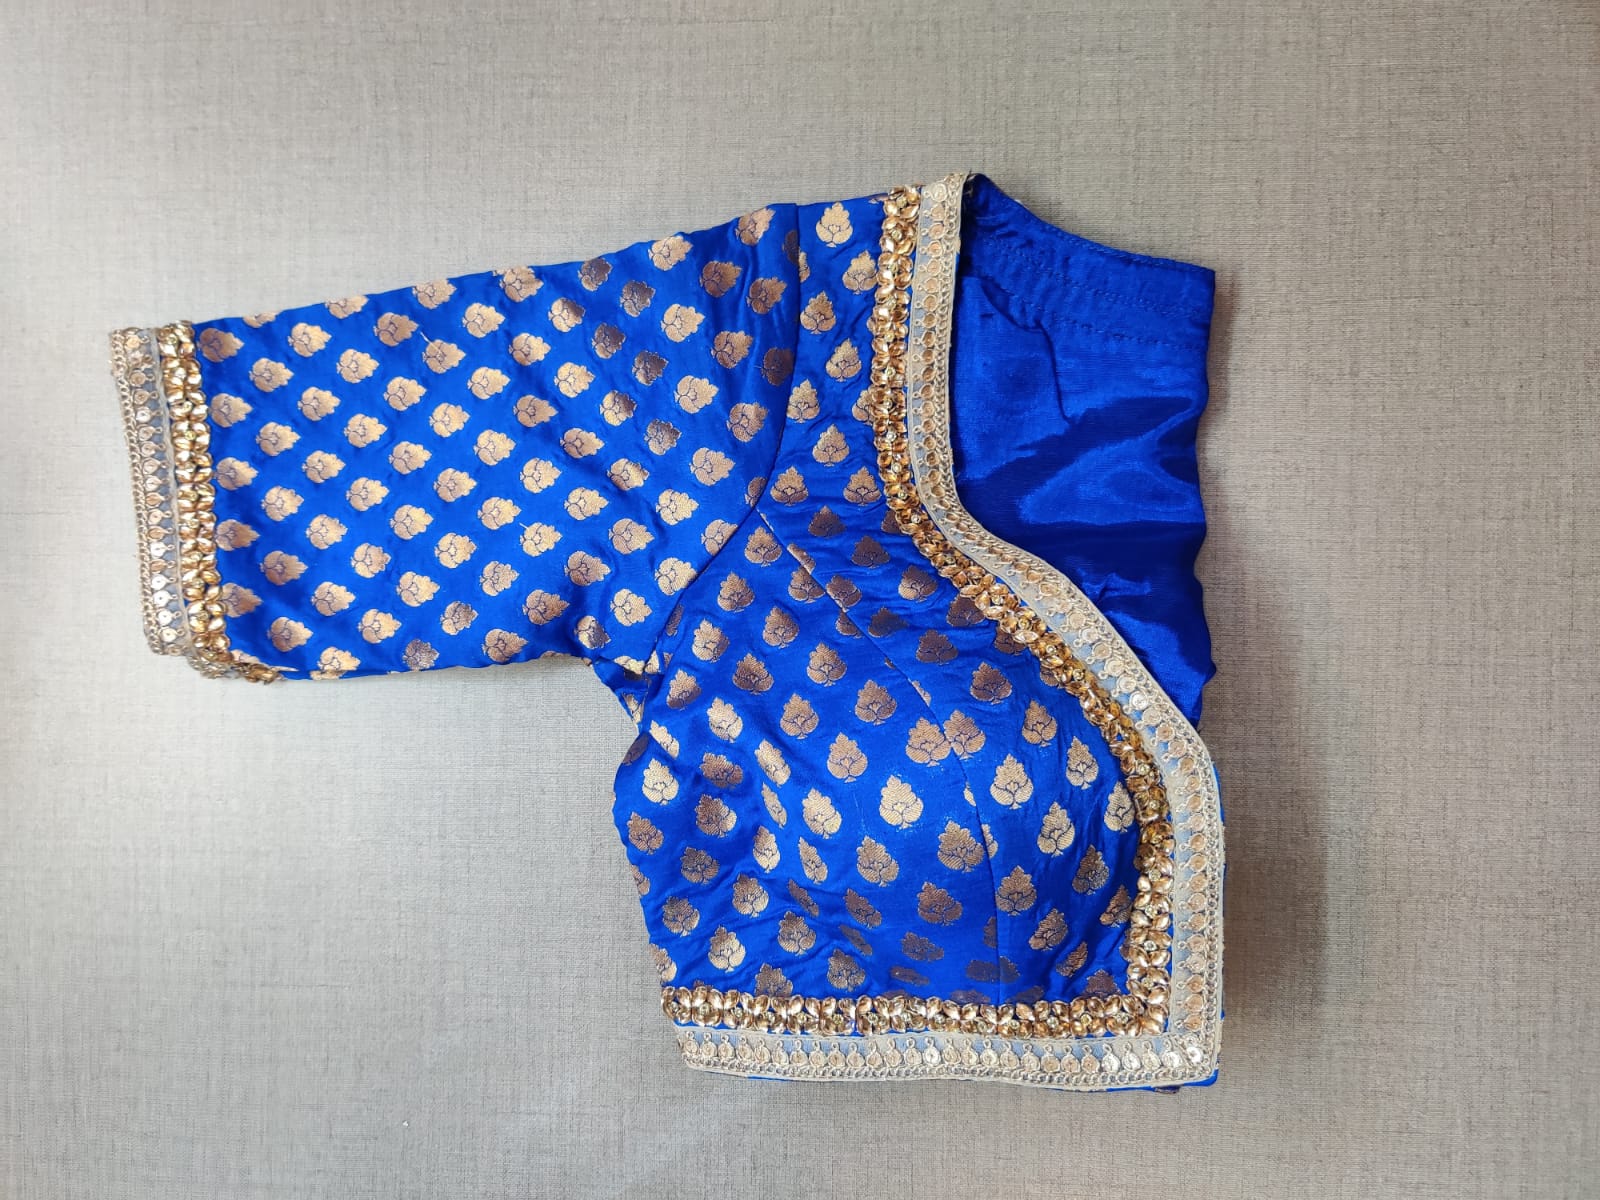 Buy stunning blue Banarasi saree blouse online in USA with embroidery. Elevate your Indian ethnic saree looks with beautiful readymade sari blouse, embroidered saree blouses, Banarasi saree blouse, designer saree blouses, sleeveless saree blouses from Pure Elegance Indian fashion store in USA.-sleeves